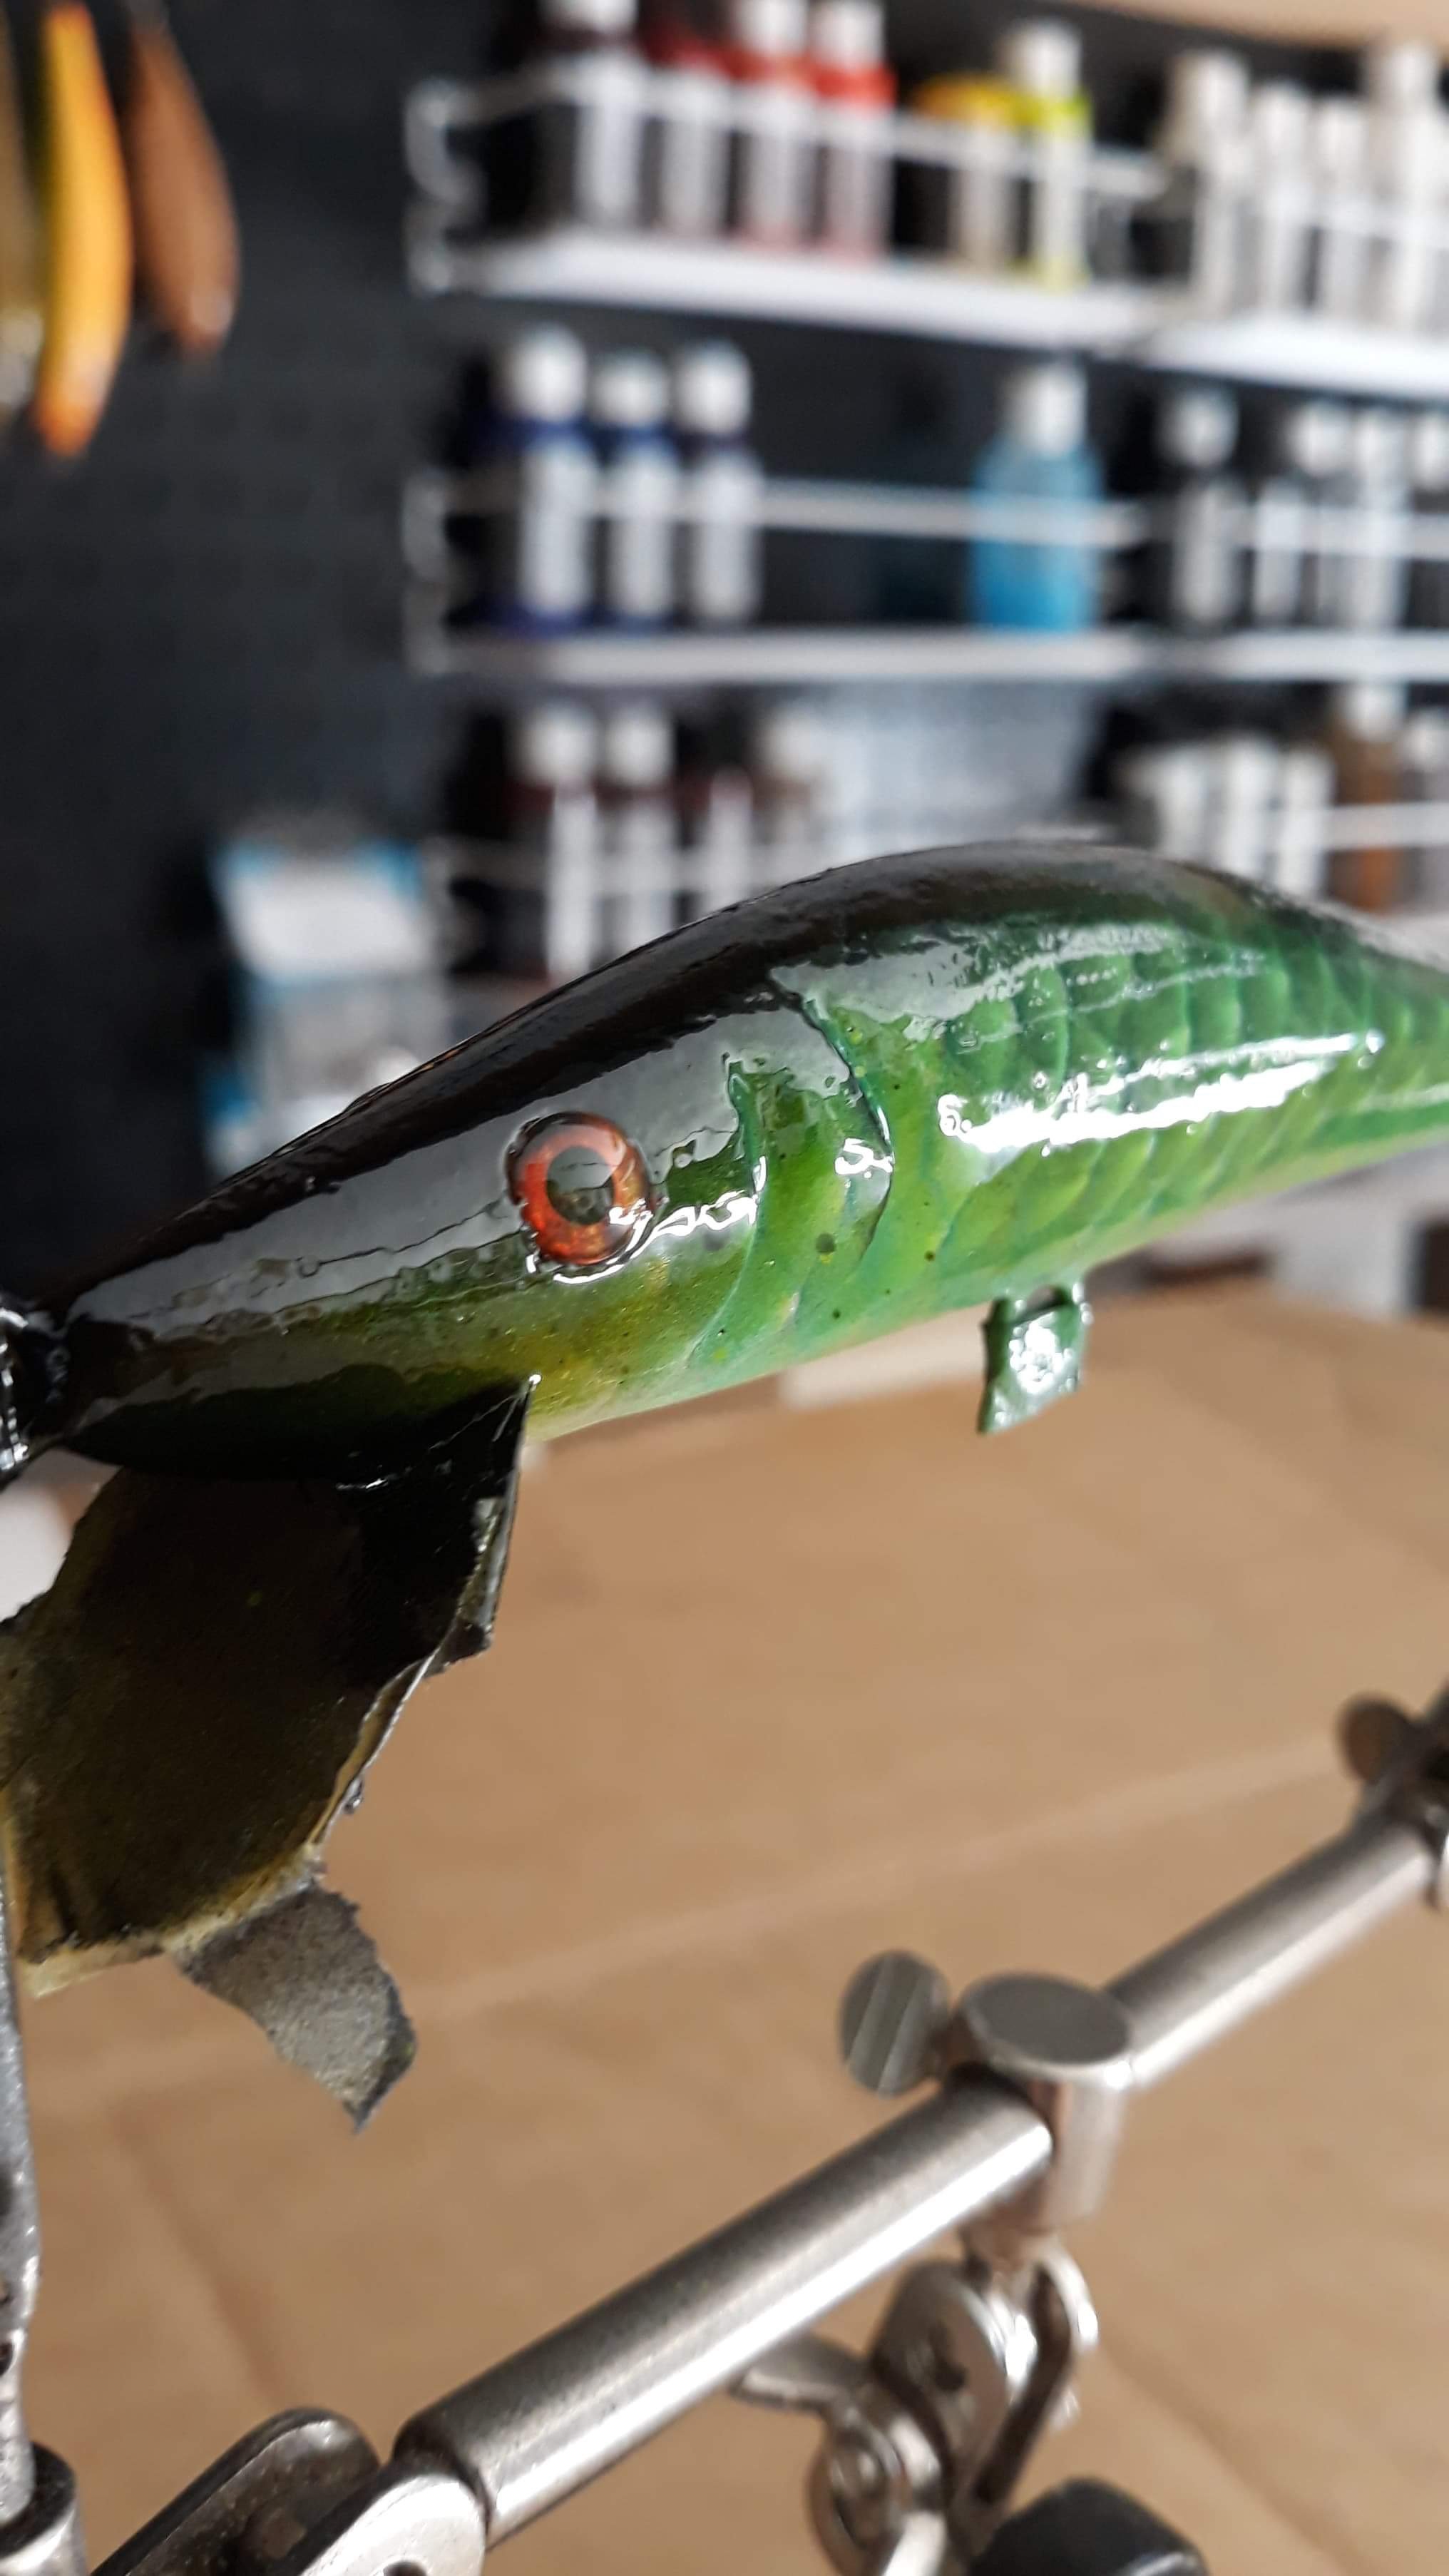 Resin clear coat problems - Hard Baits -  - Tackle  Building Forums